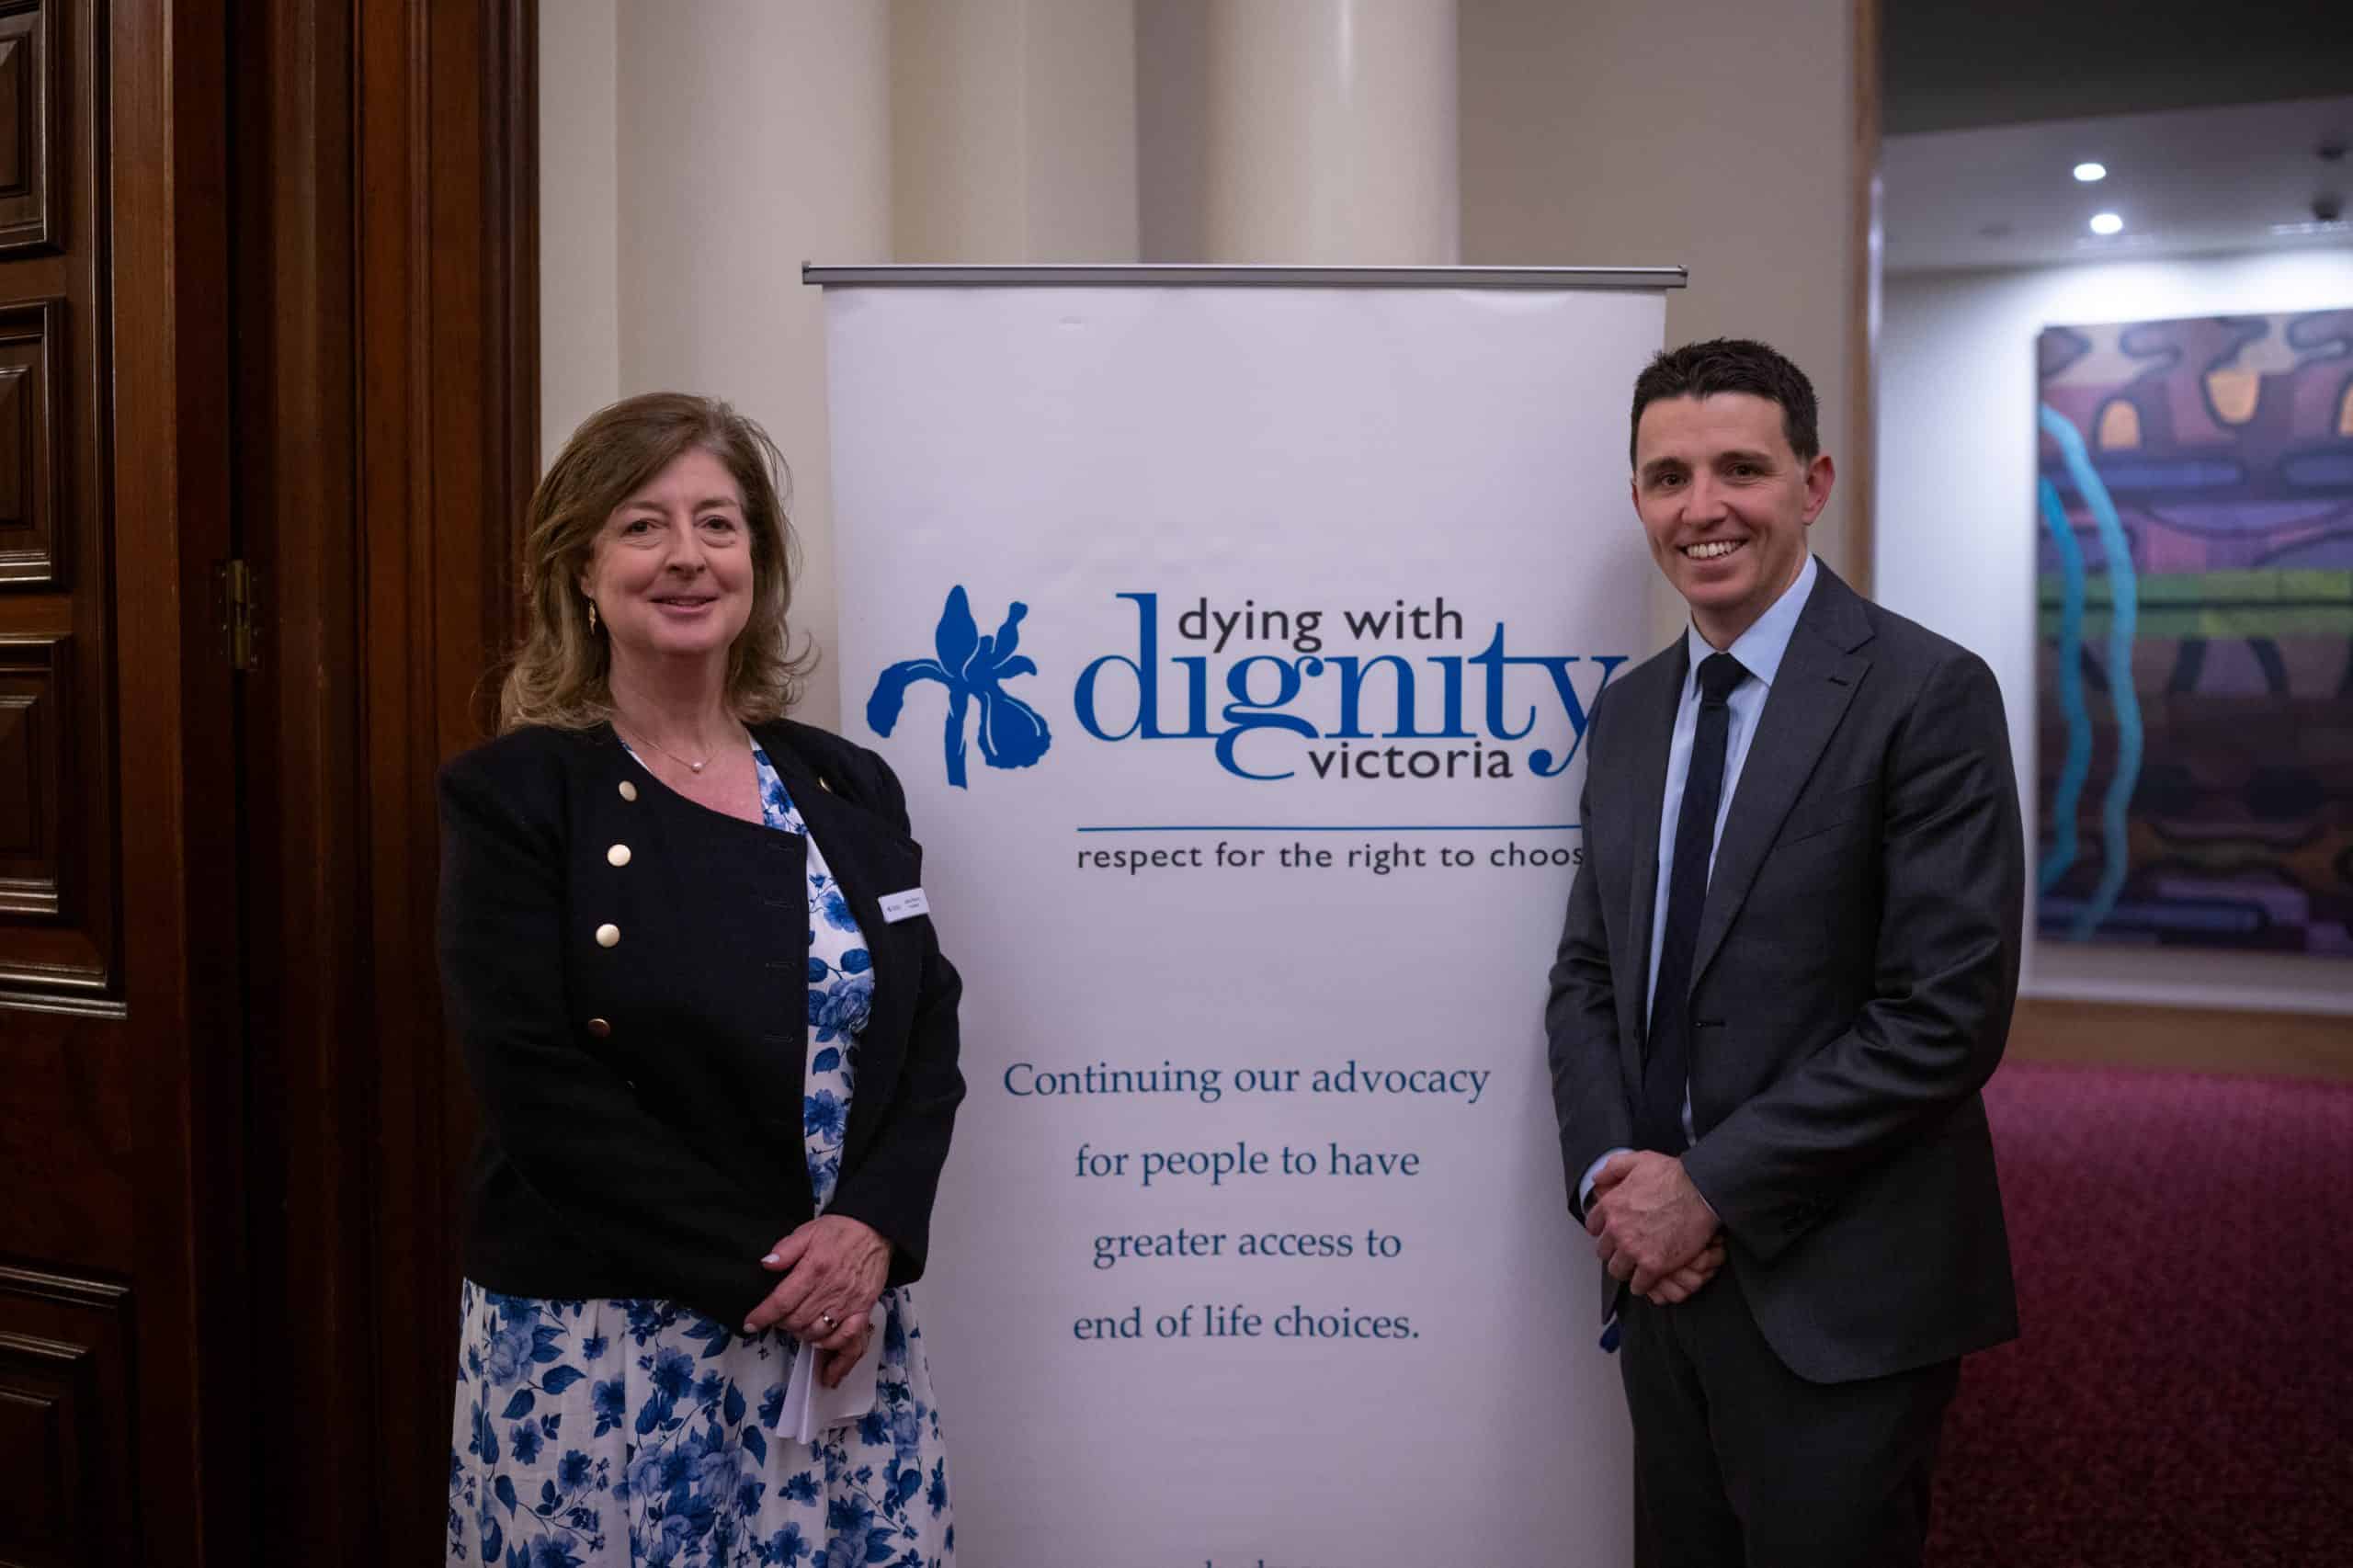 Dying With Dignity Victoria Celebrates Its 50th Anniversary!